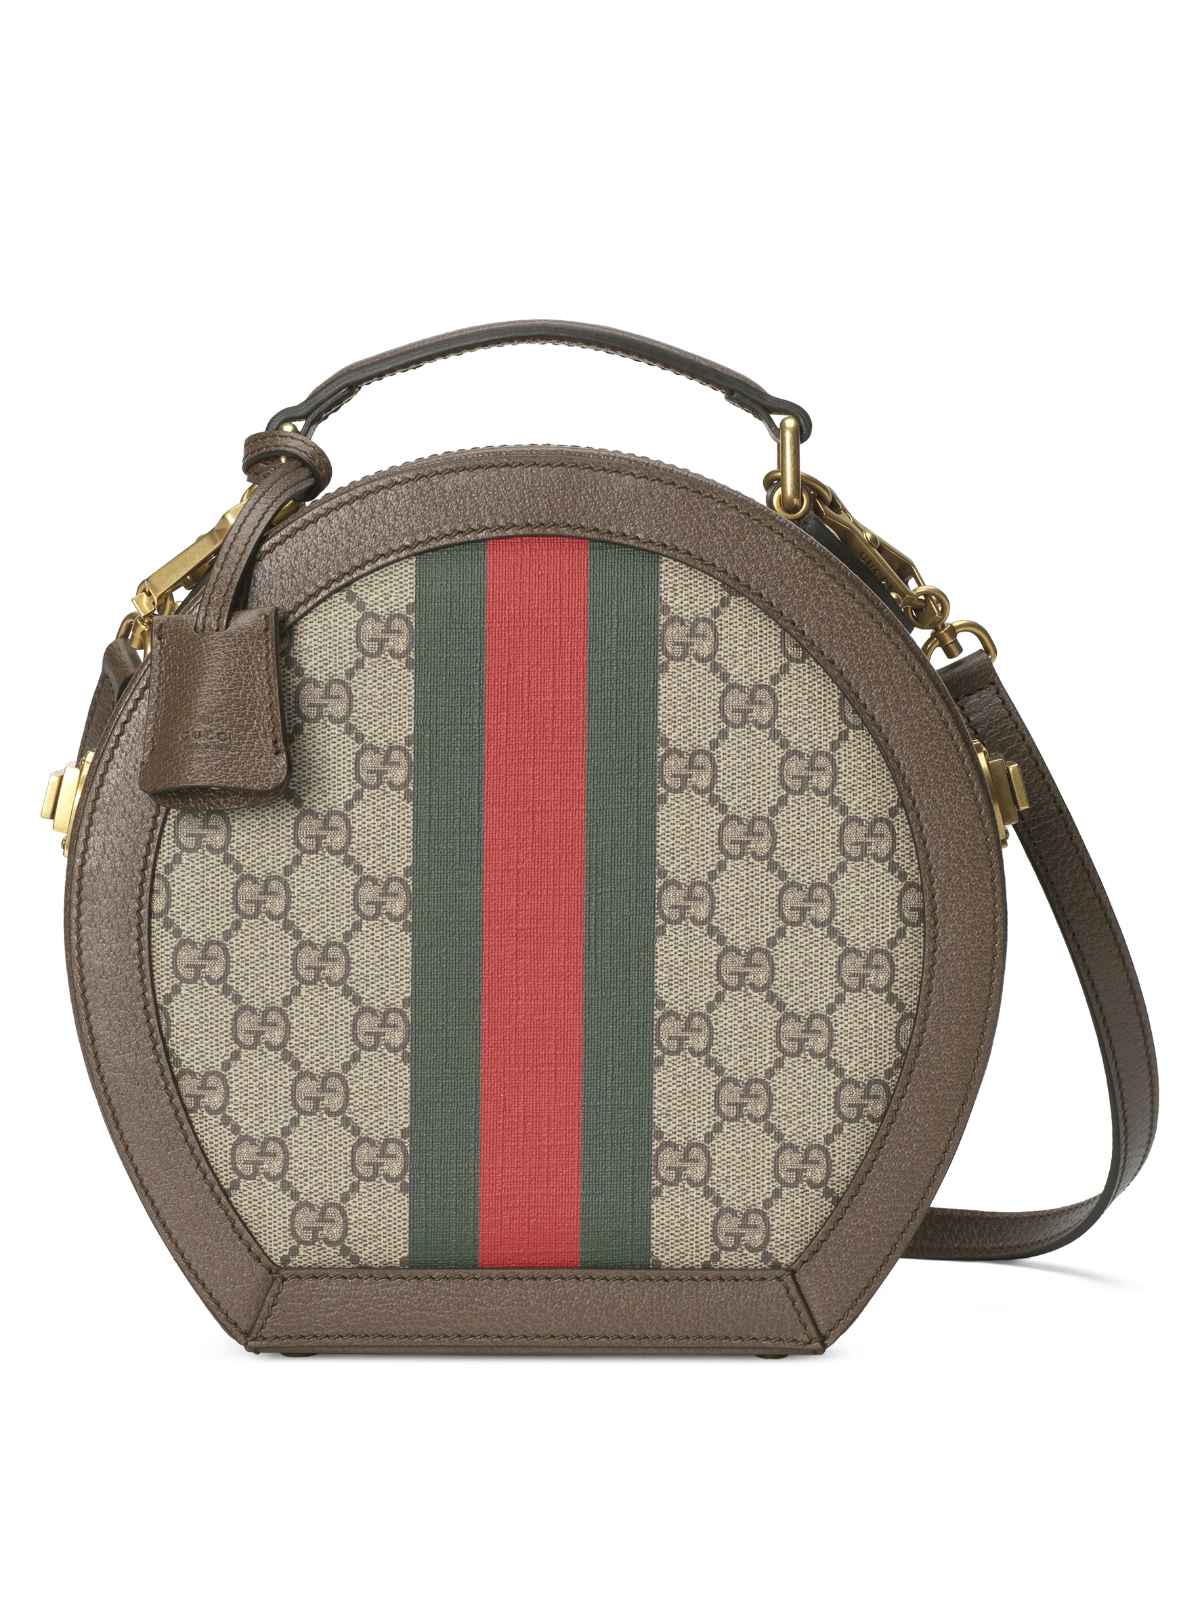 Gucci Valigeria: The Experience Of The Unexpected